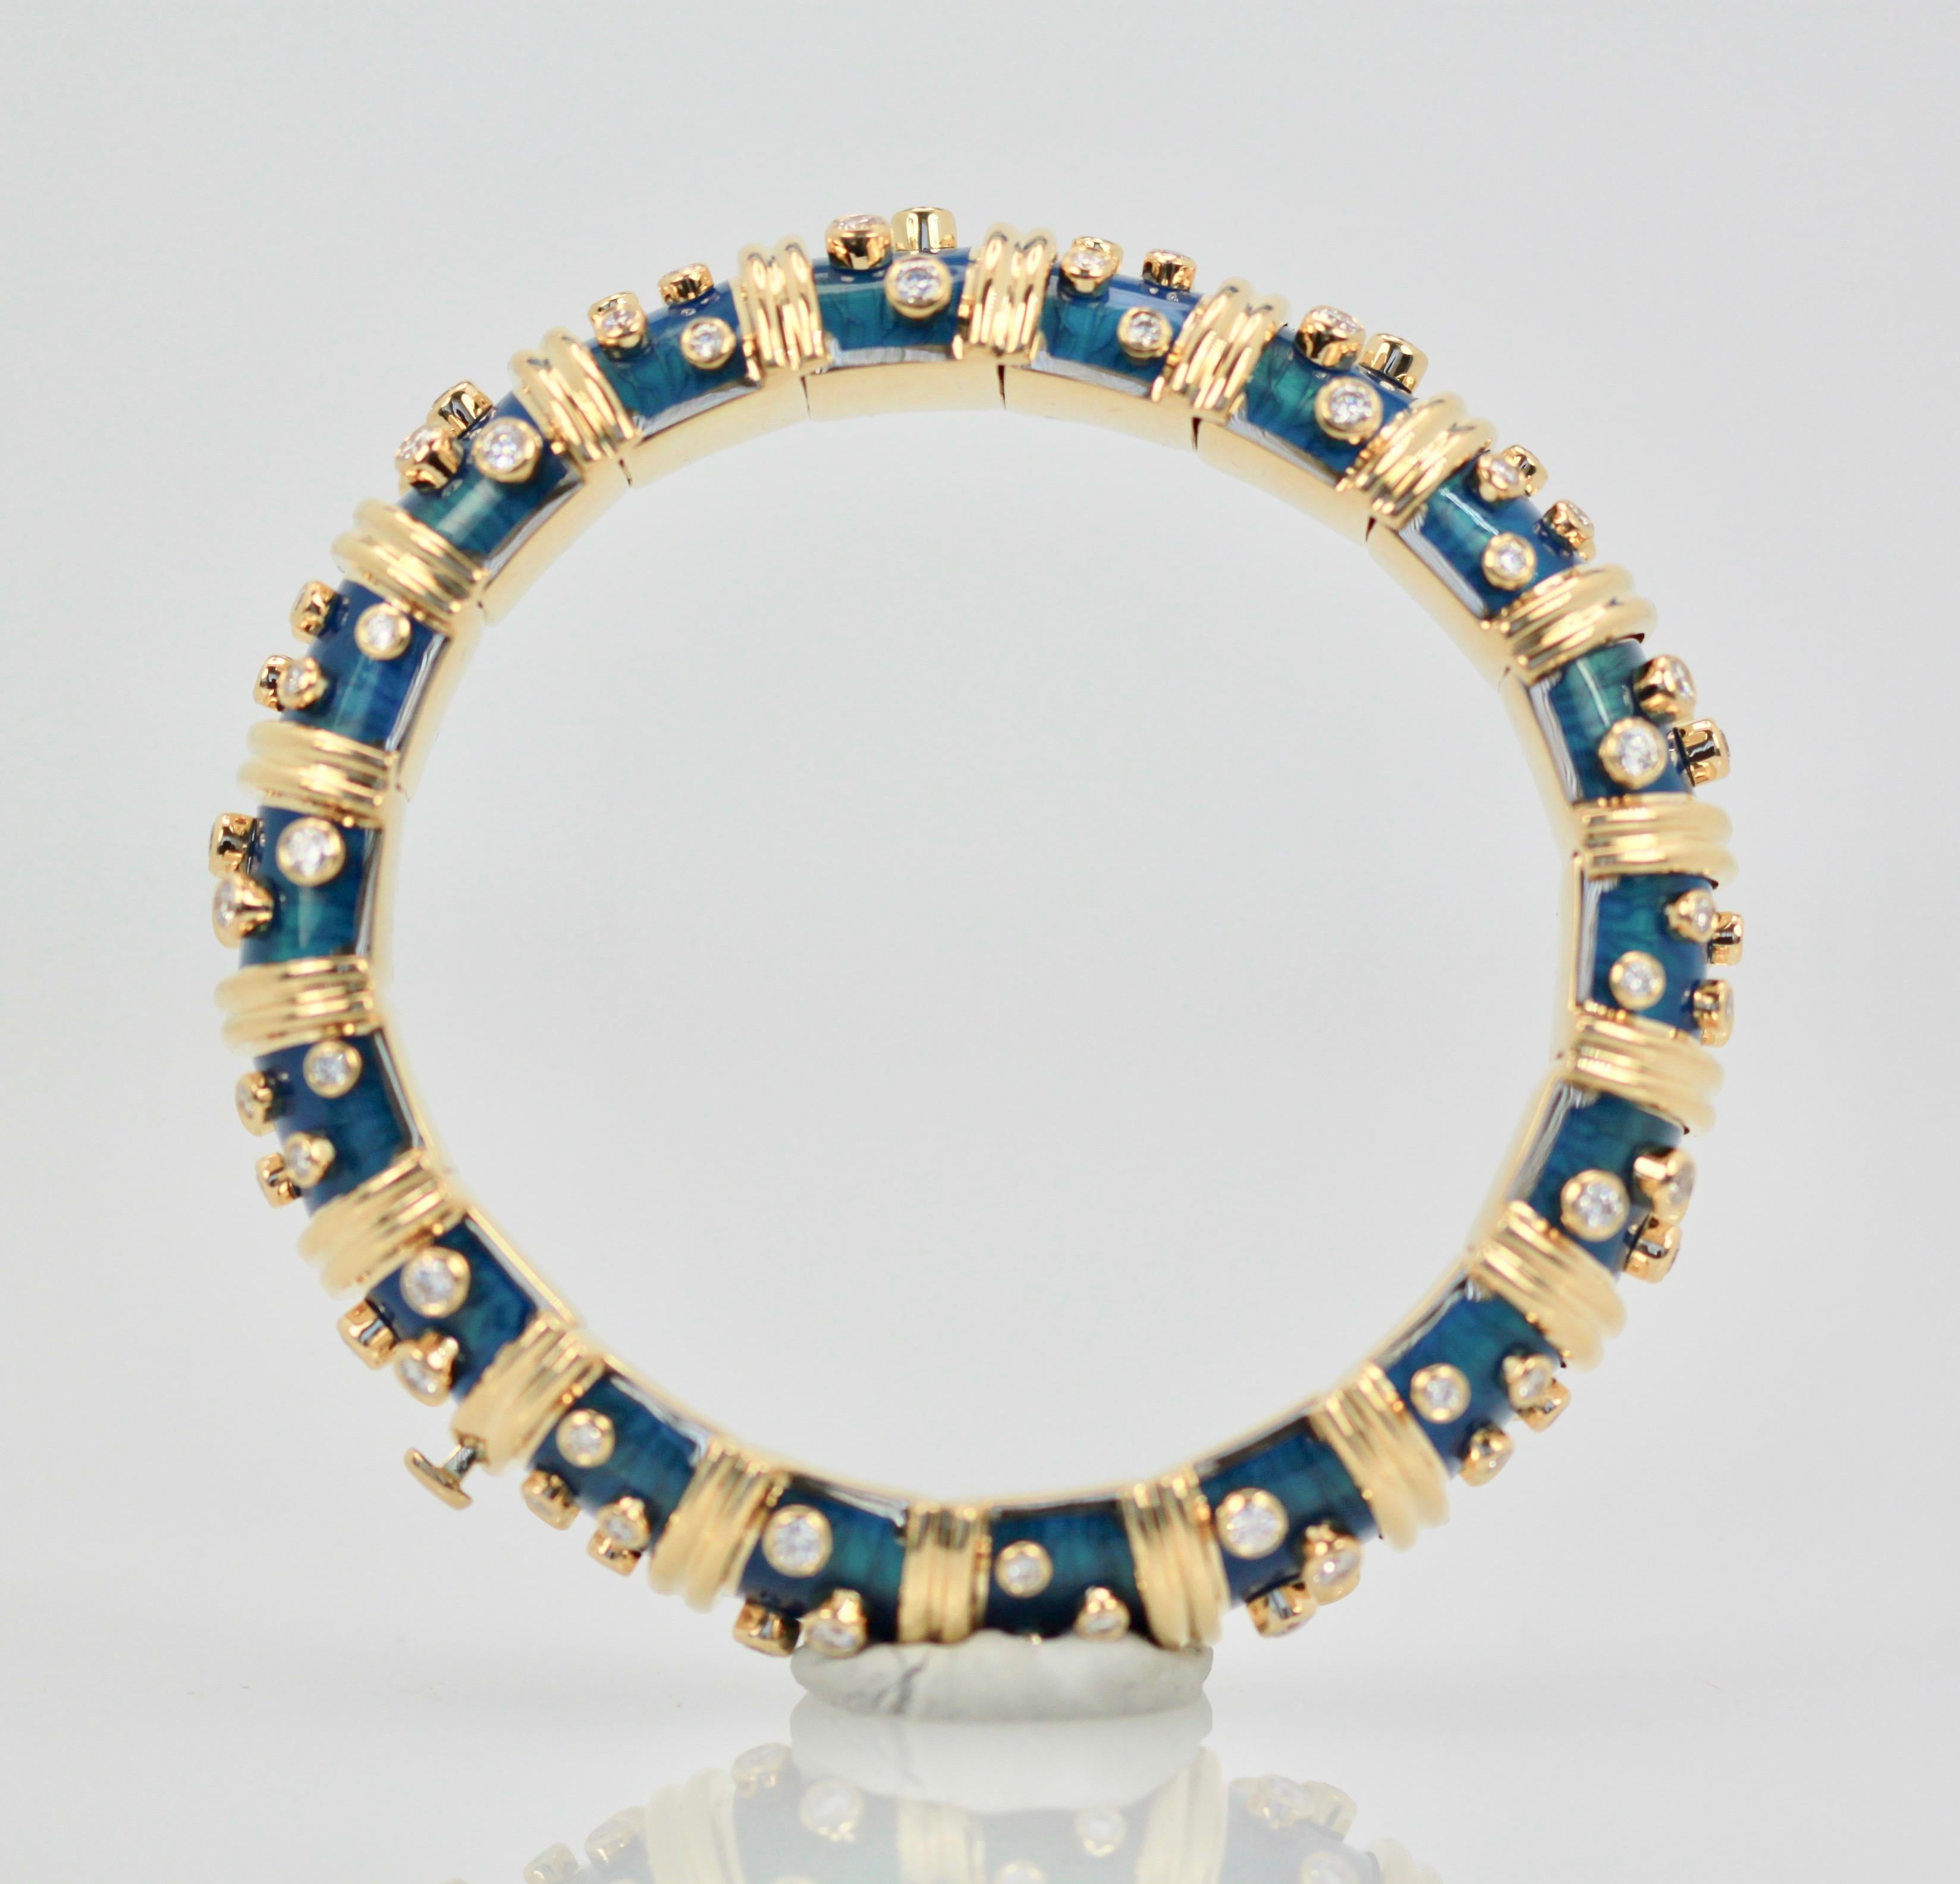 This Tiffany & Company Schlumberger Diamond Bracelet is in near mint condition.  The bracelet has barely been worn as all the segments are very tight.  This is the Blue Enamel bracelet with 108 Diamonds approximately 8 carats and fits a size 6 to 7